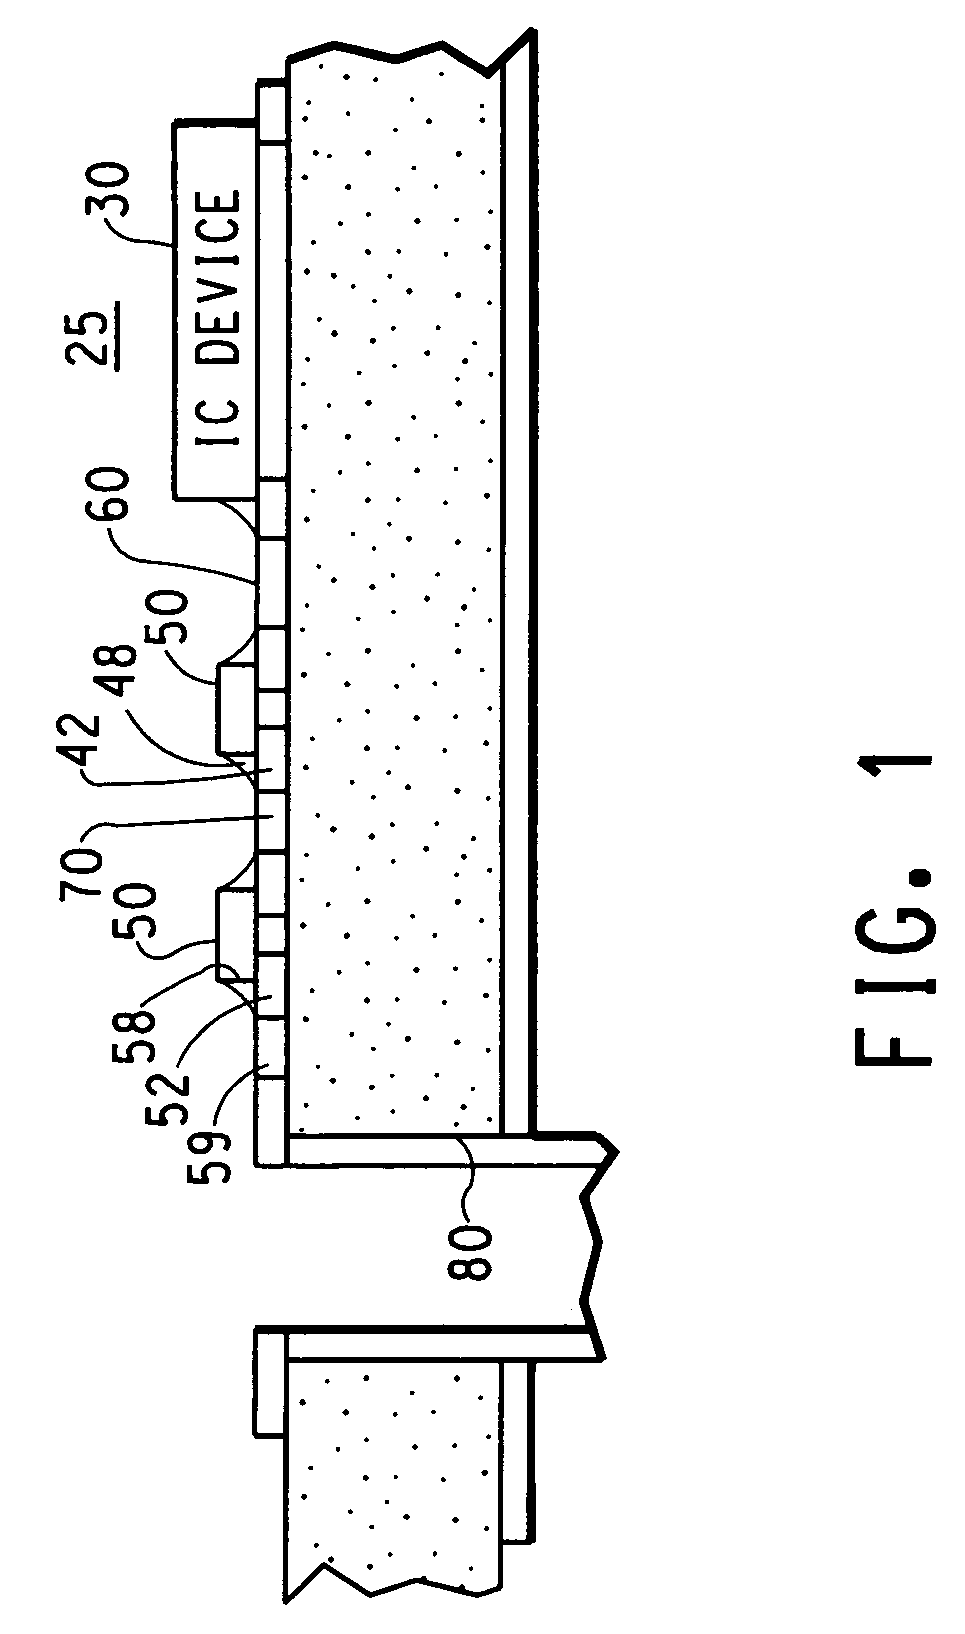 Capacitive devices, organic dielectric laminates, multilayer structures incorporating such devices, and methods of making thereof